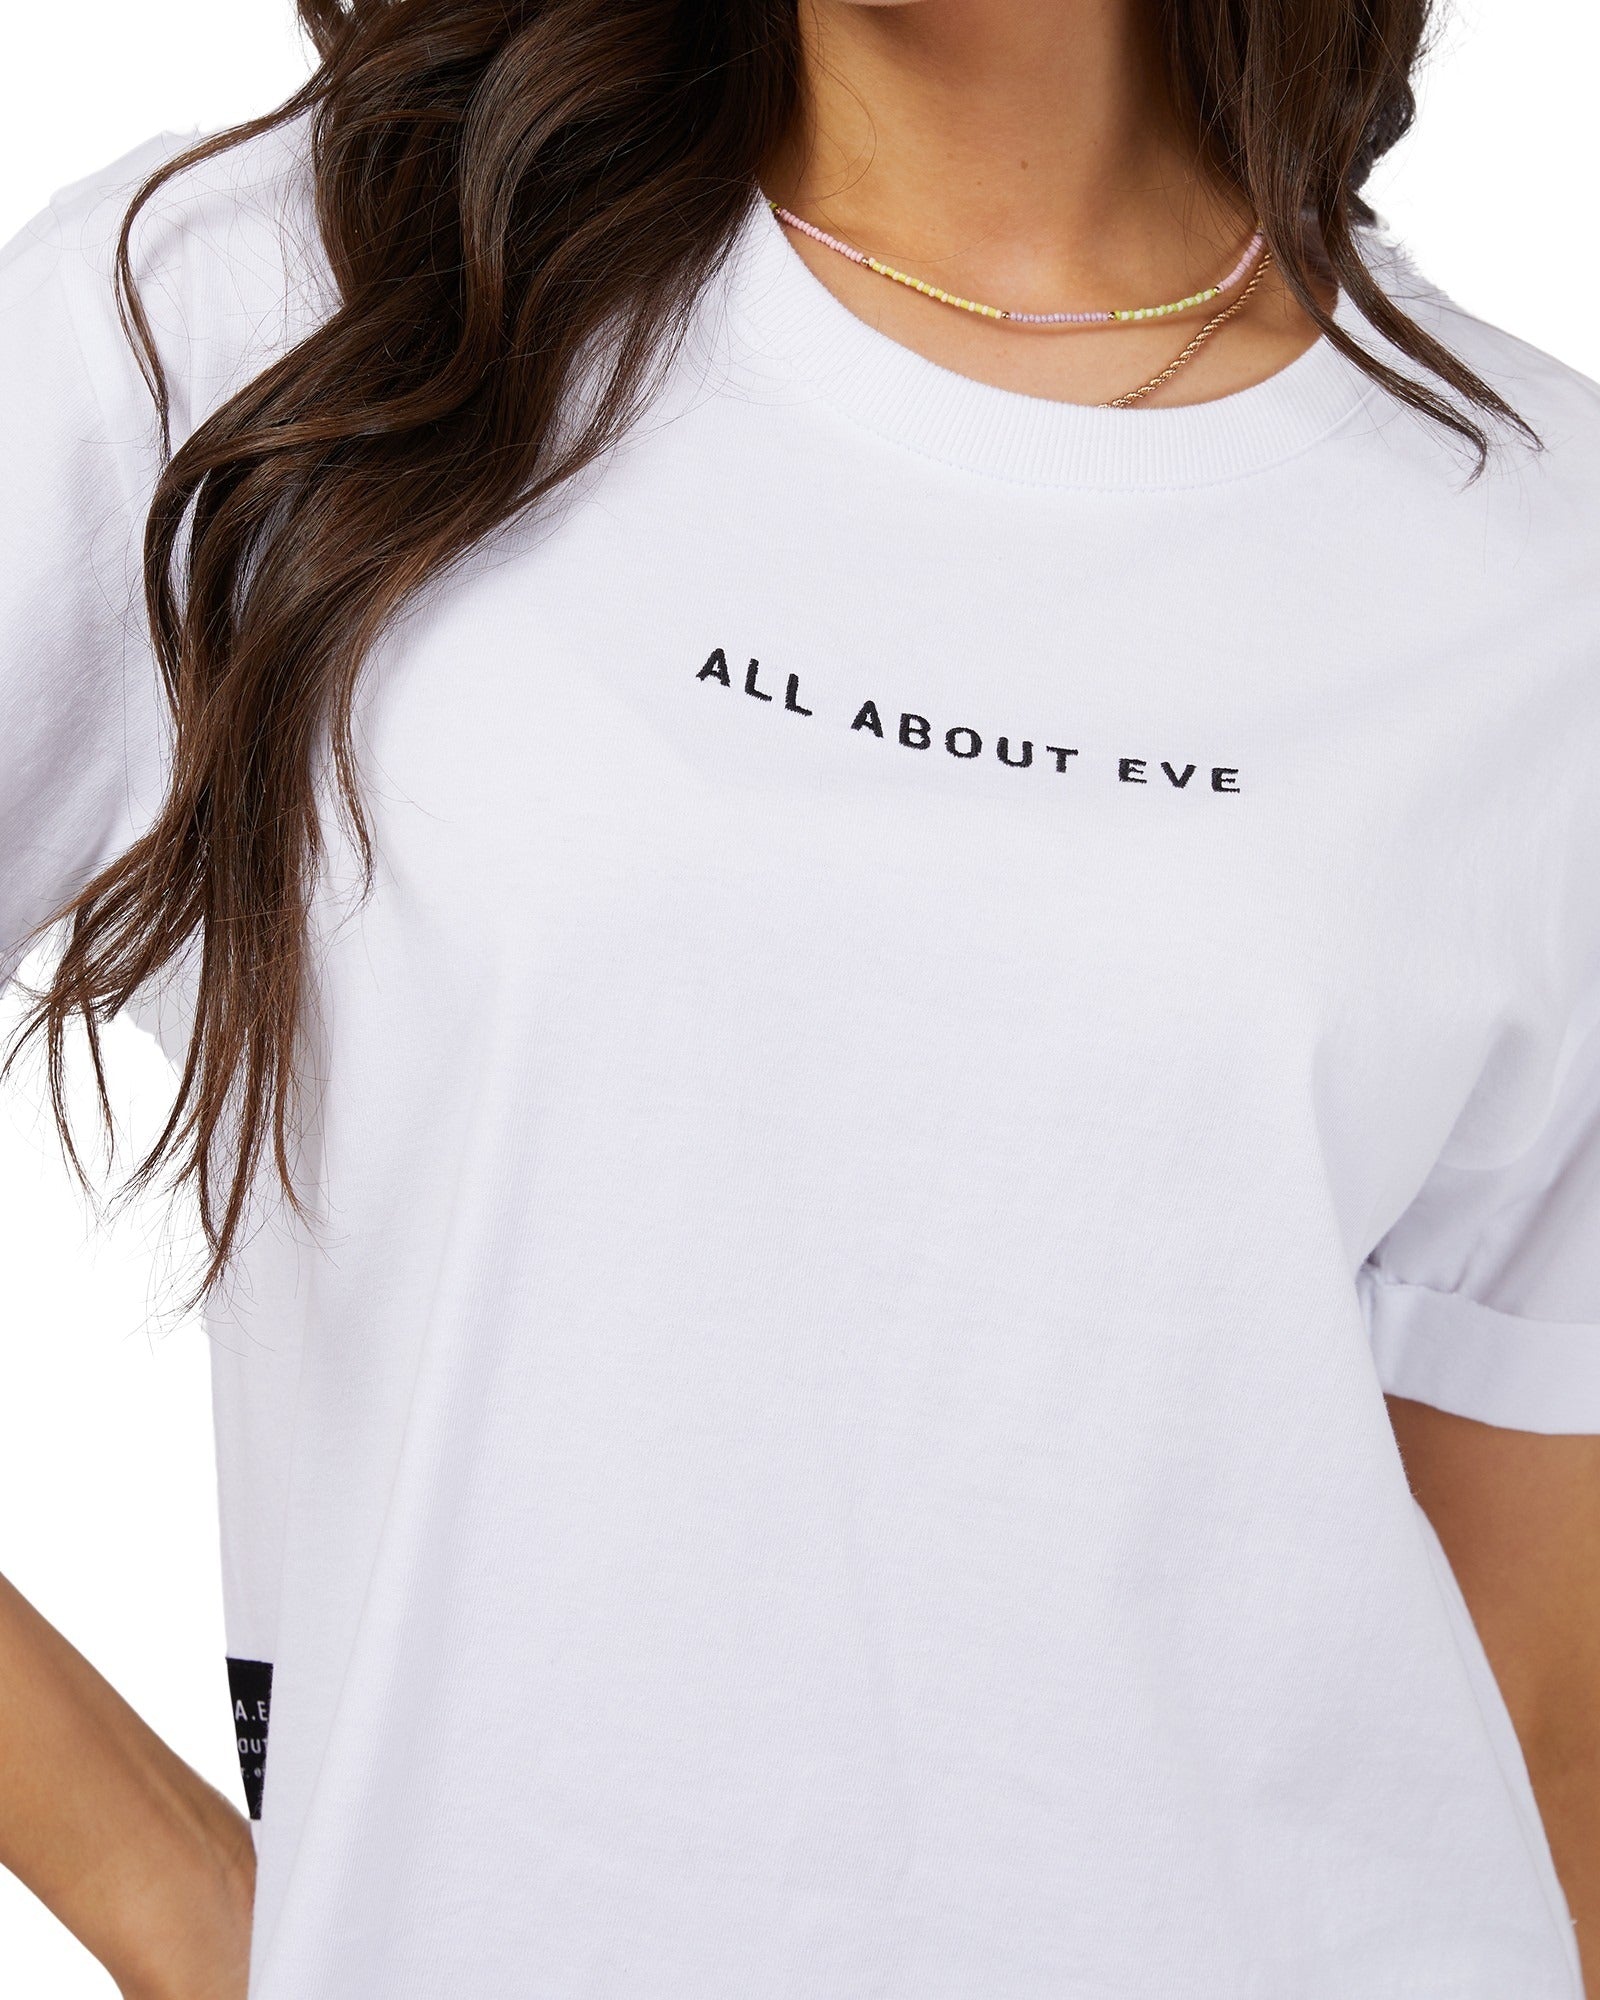 All About Eve - Washed Tee - White